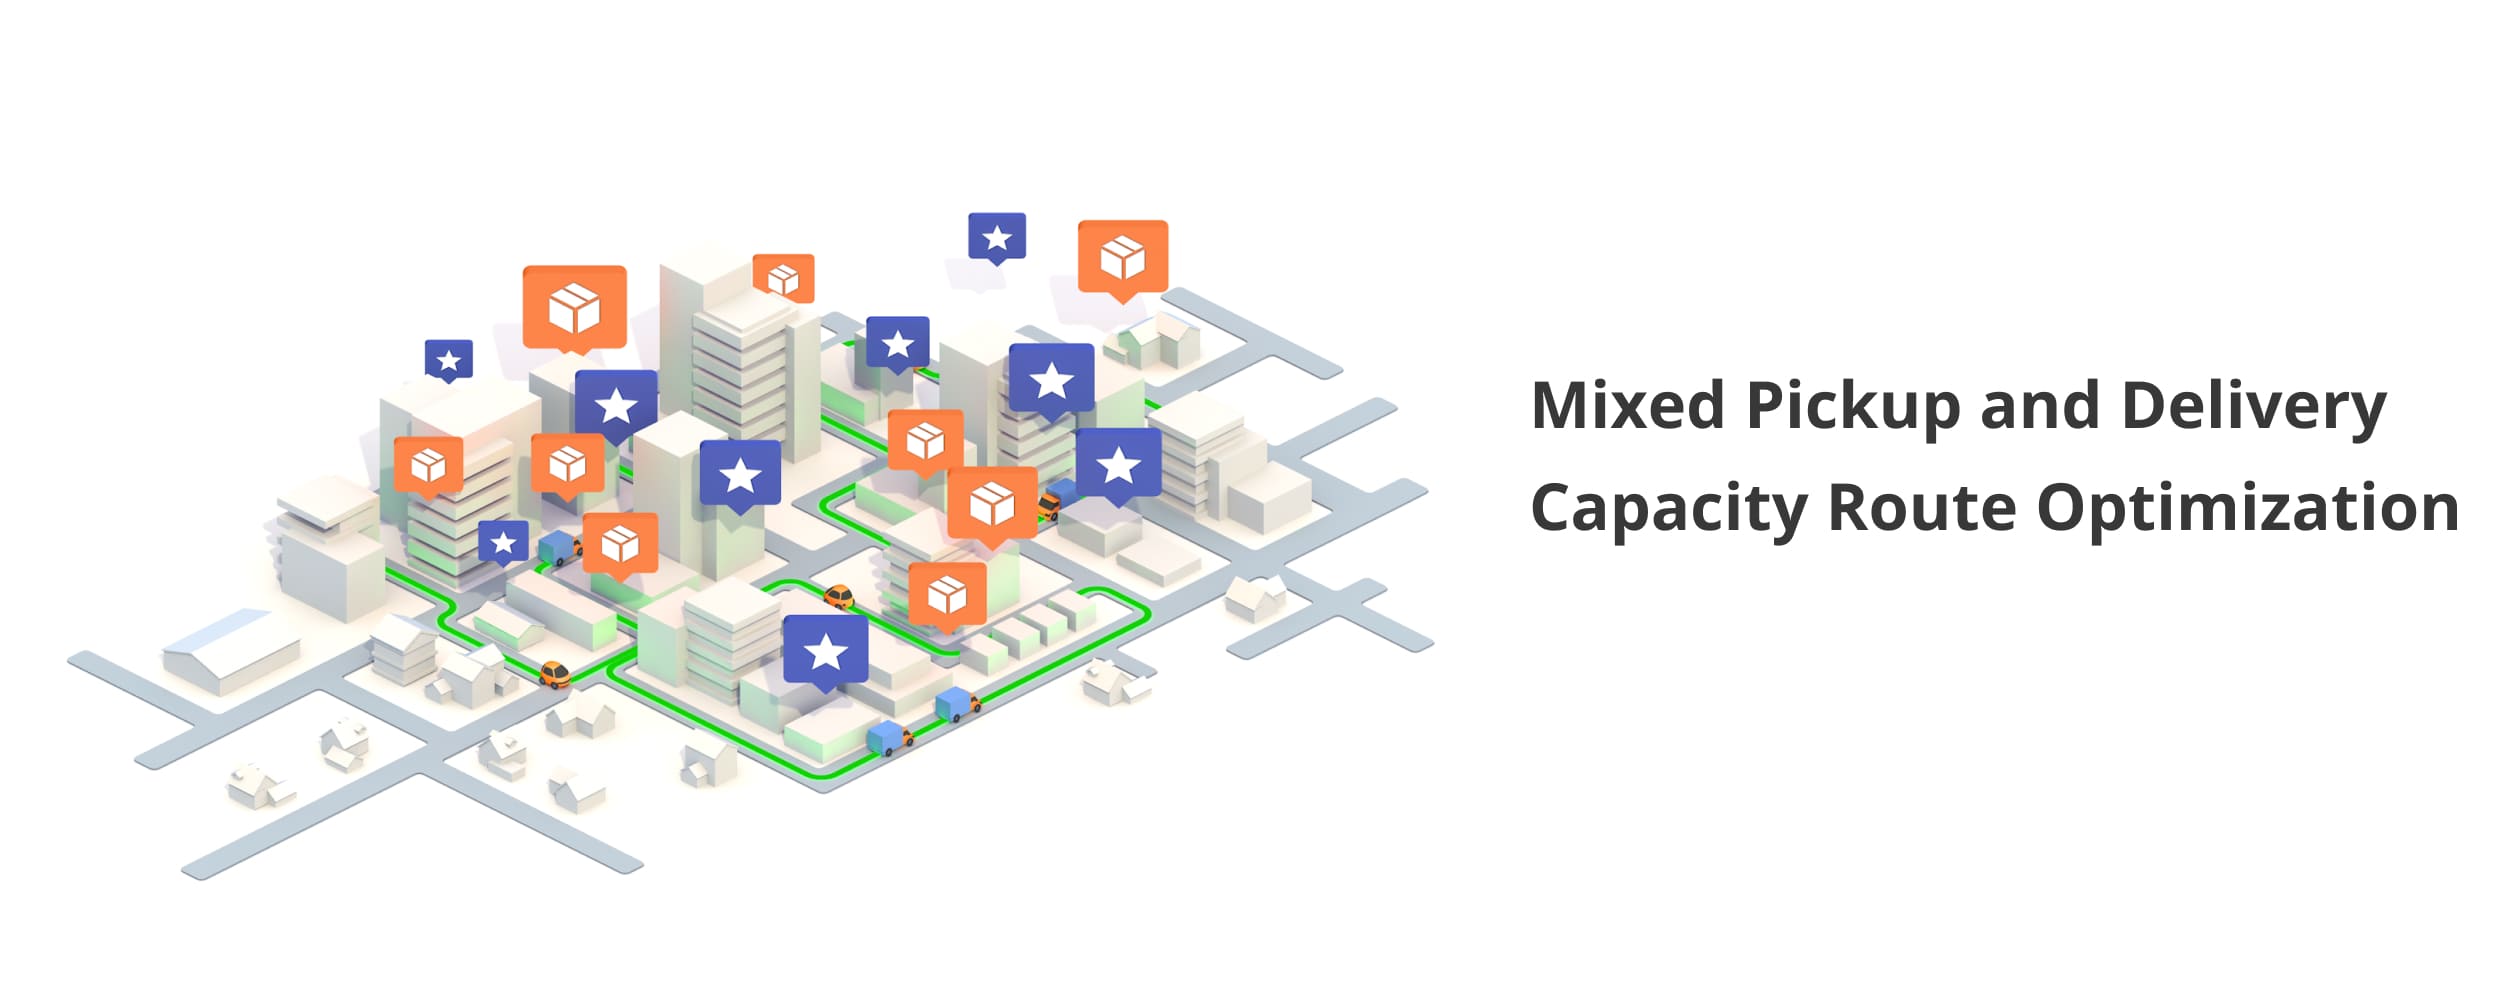 Mixed pickup and delivery route capacity optimization with the same or different goods.